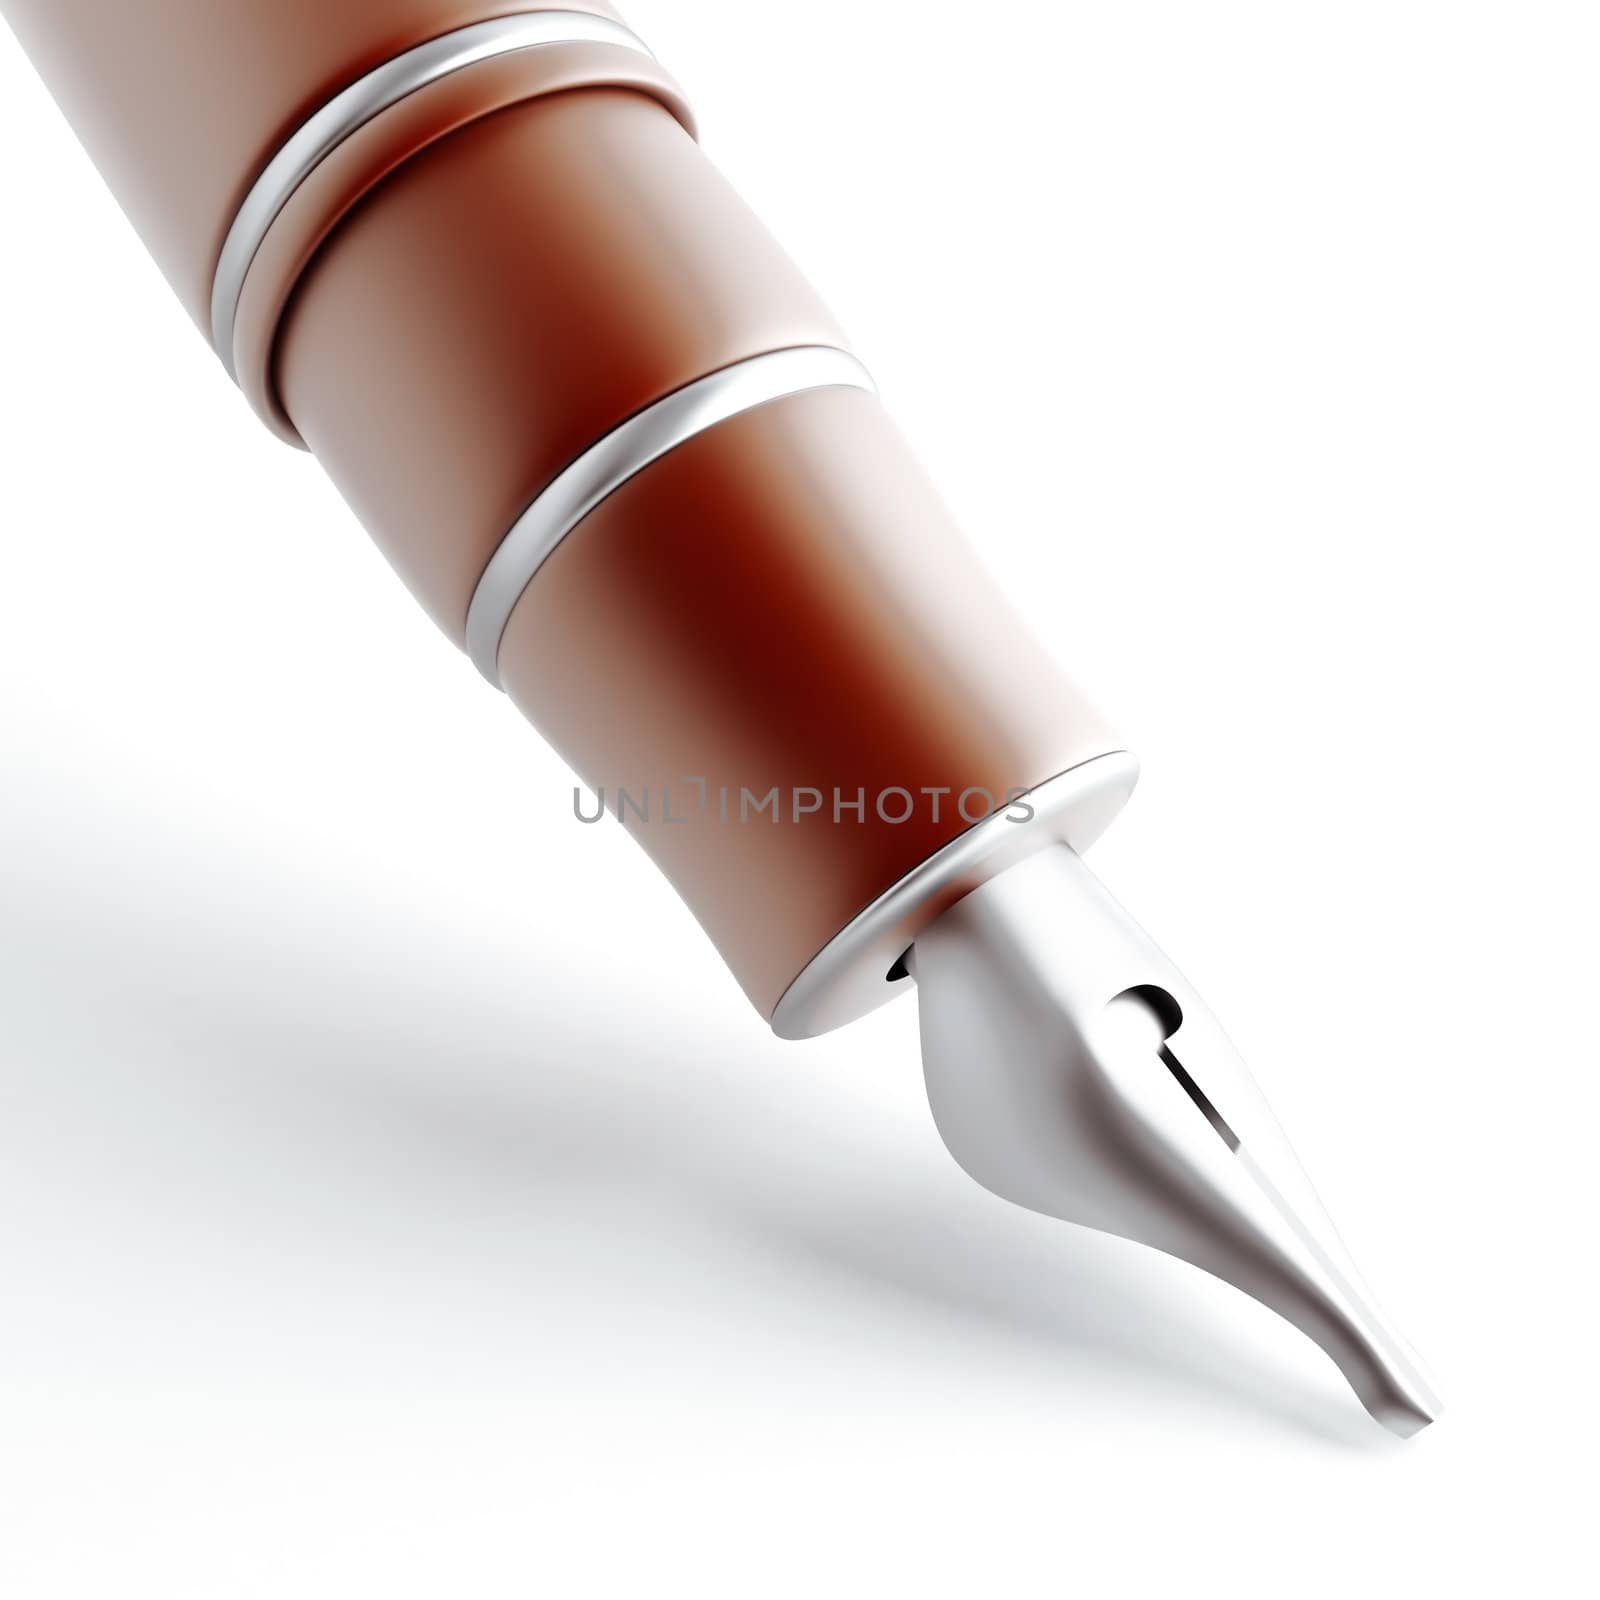 old-fashioned fountain-pen on white background